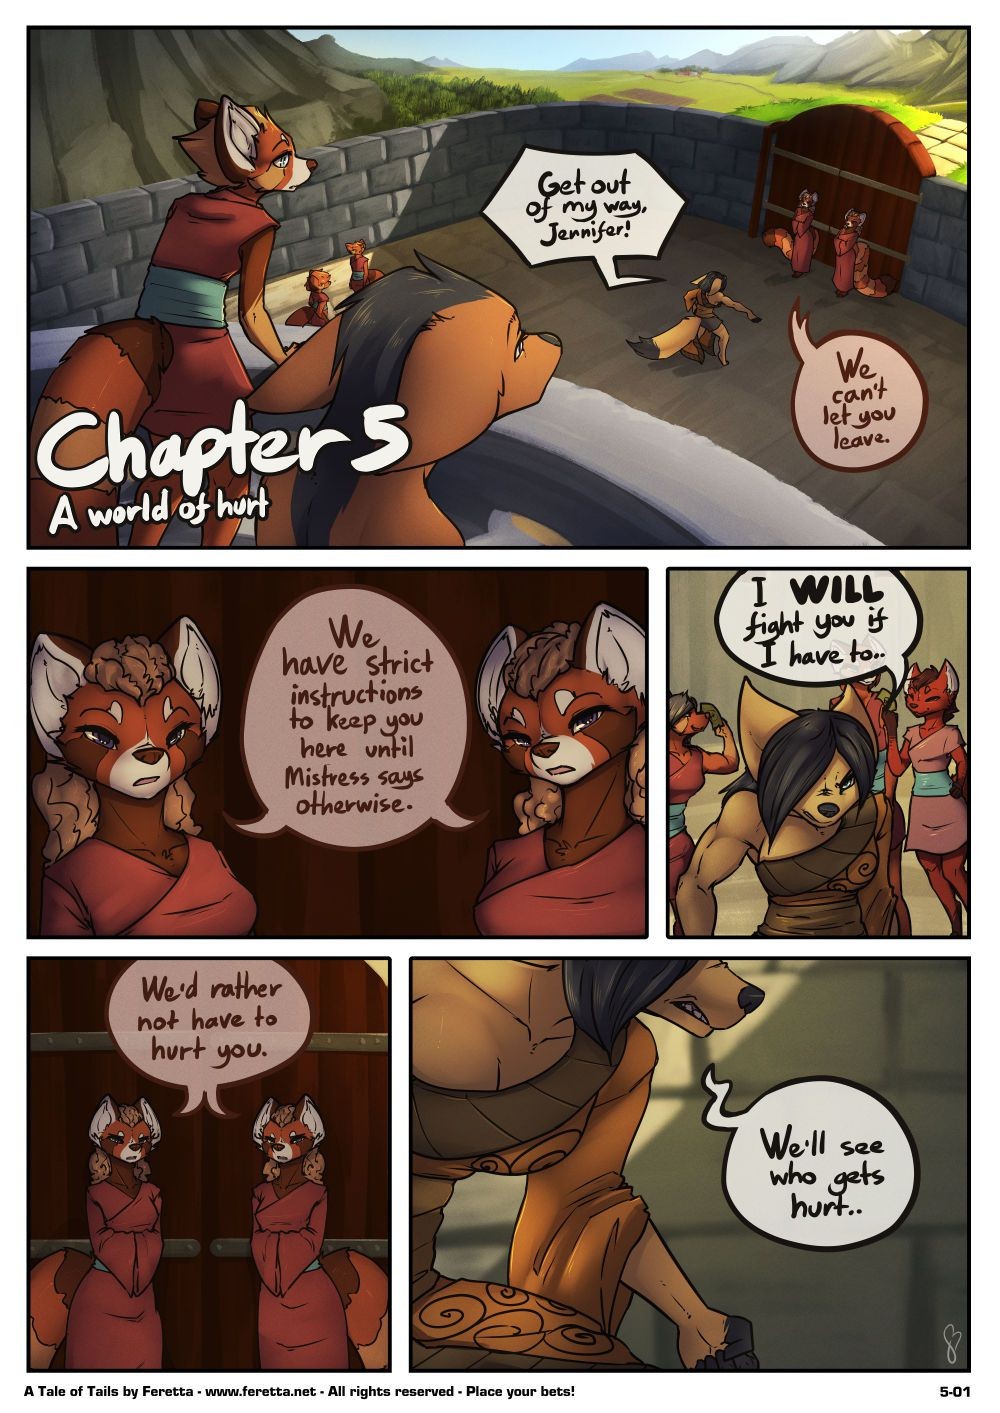 Monster Cock [Feretta] A Tale Of Tails: Chapter 5 - A World Of Hurt (ongoing) Booty